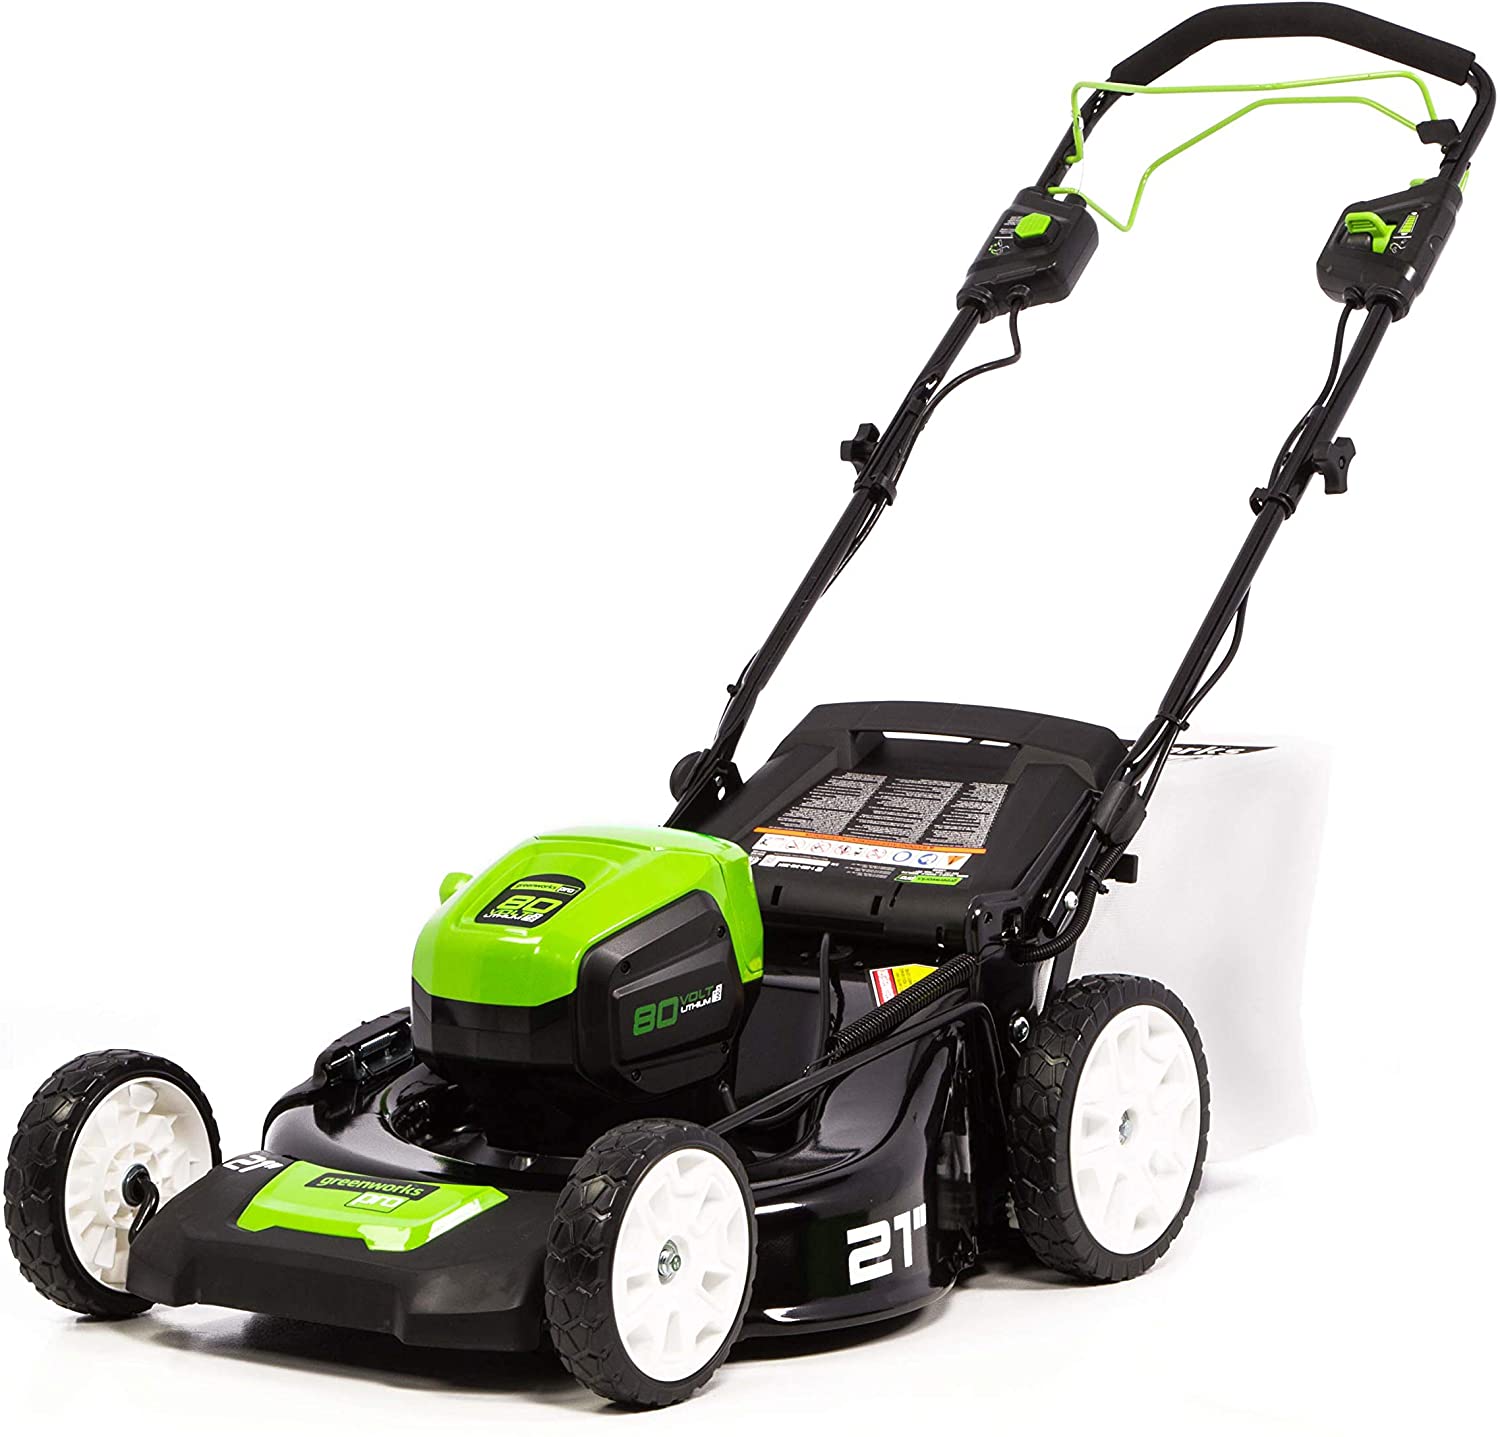 Greenworks PRO 80V Battery Powered Self-Propelled Lawn Mower, 21-Inch